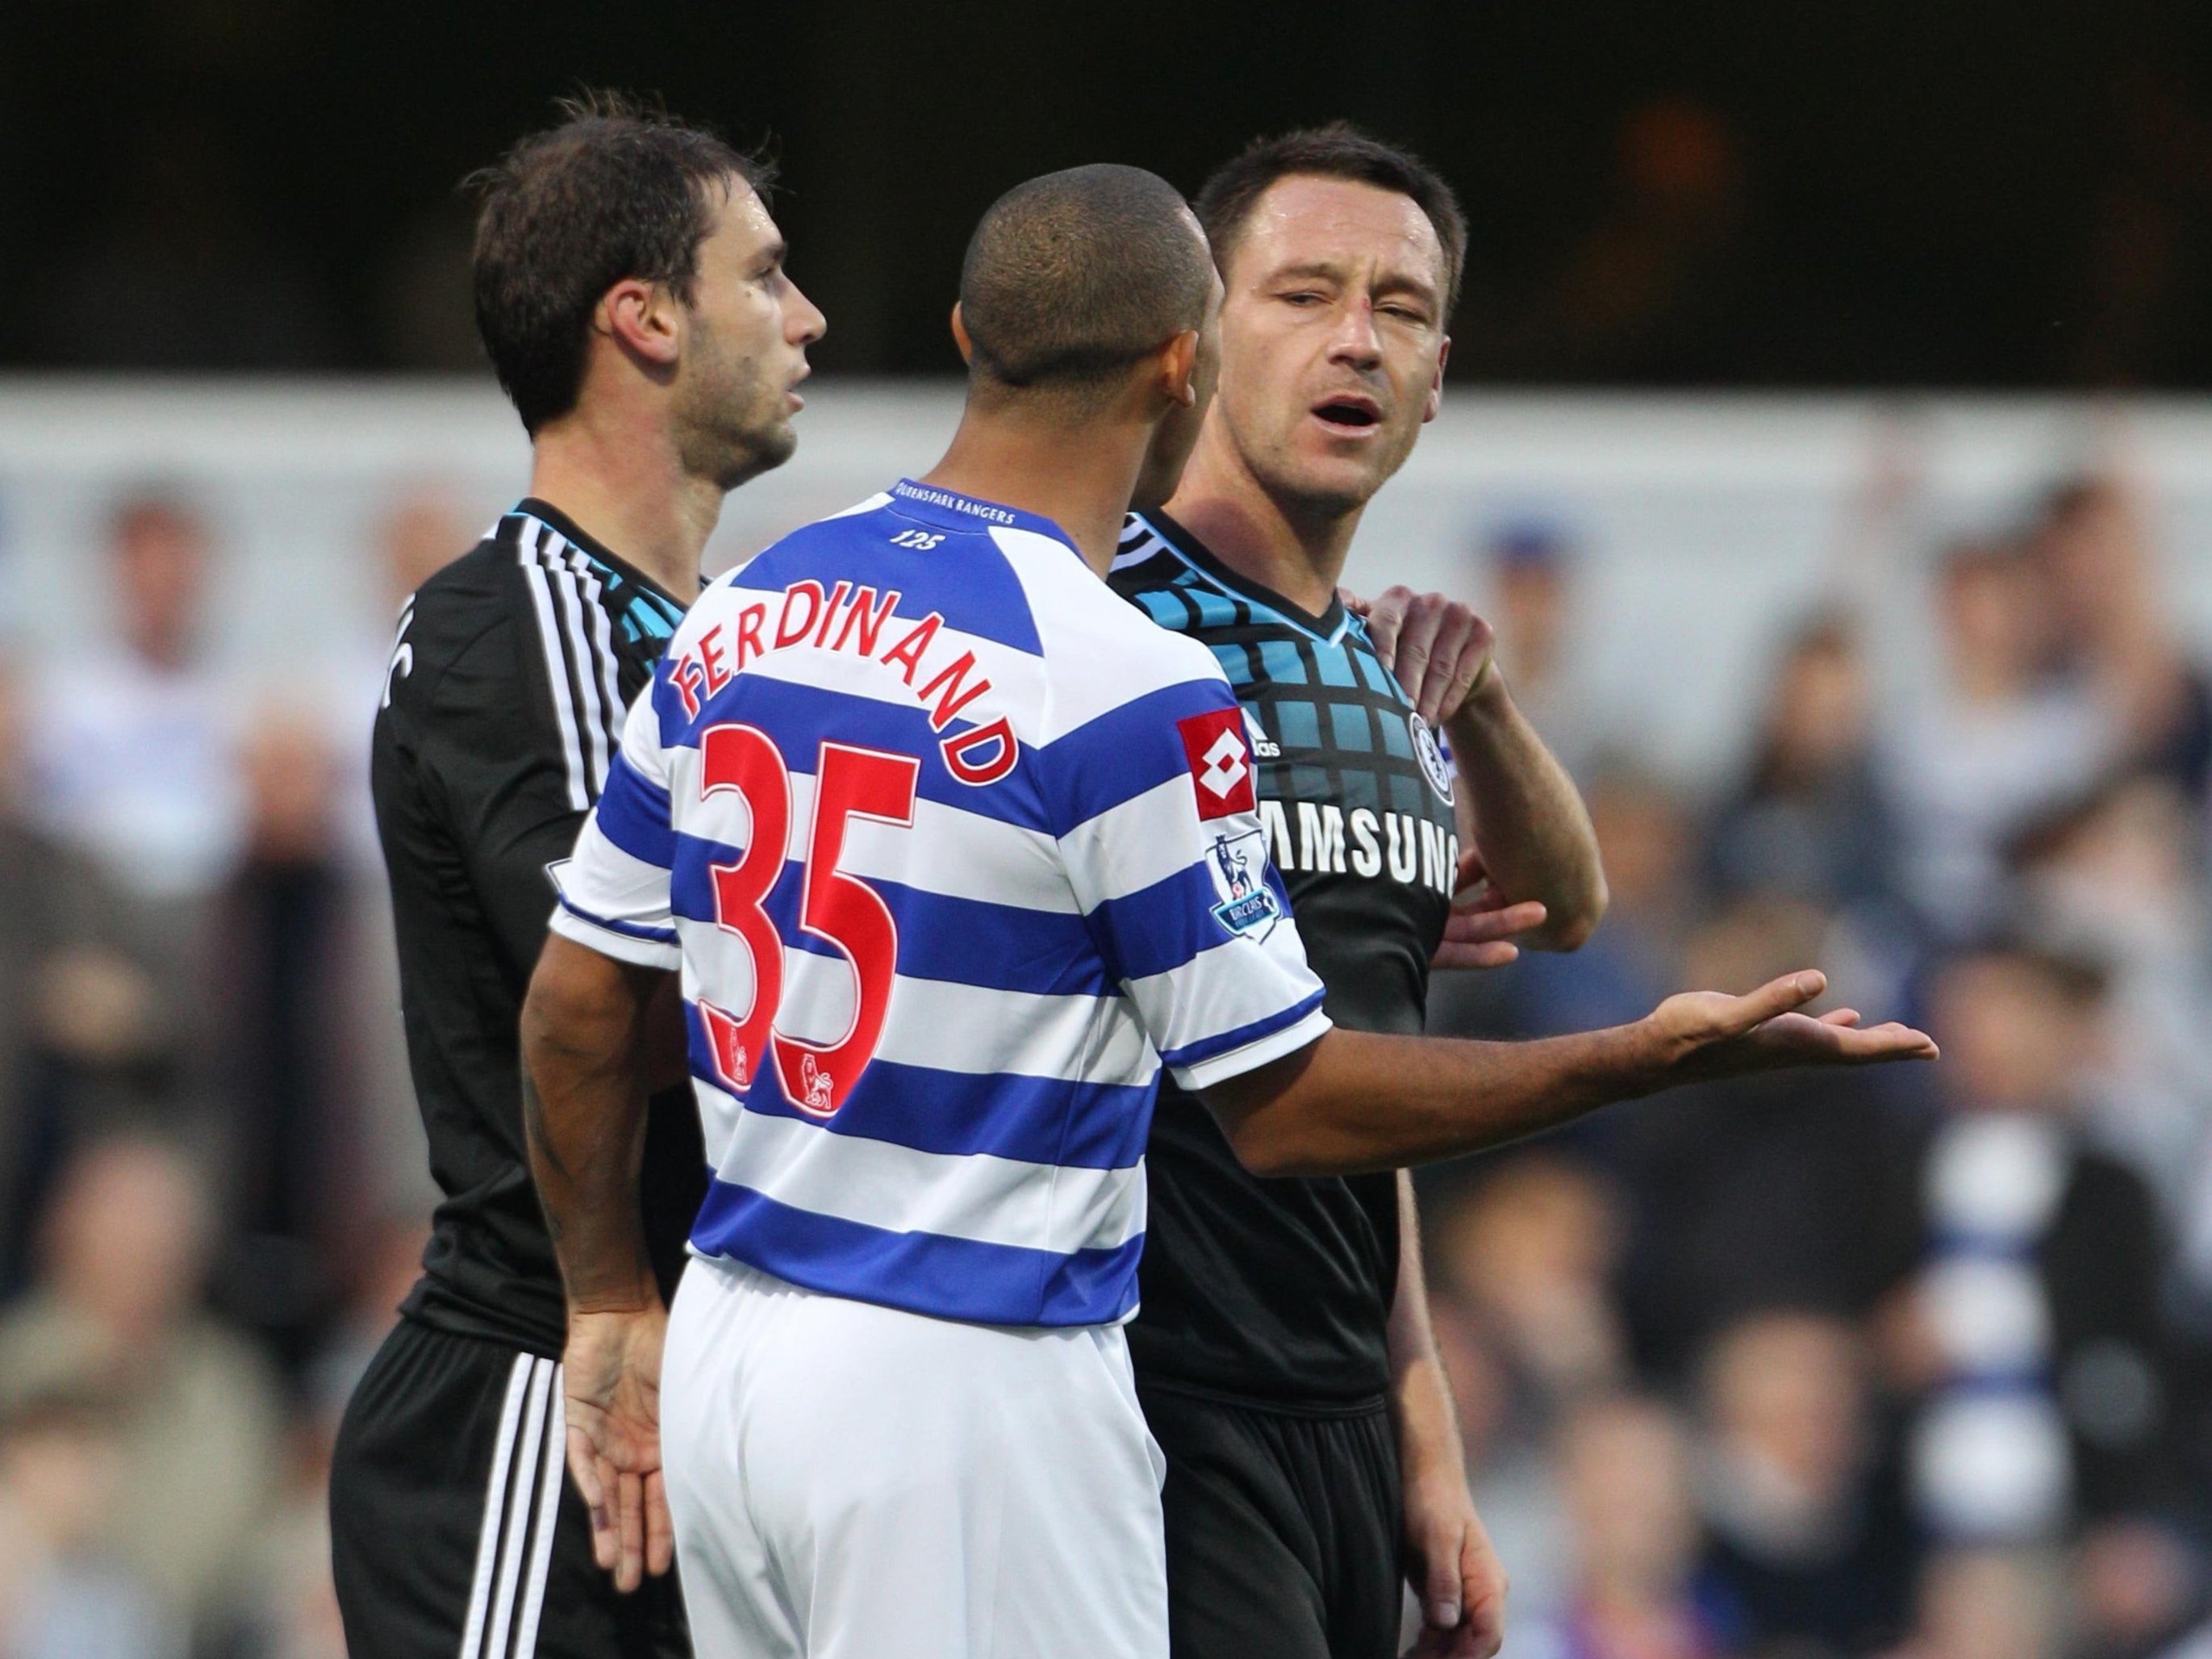 John Terry and Anton Ferdinand pictured during the Premier League match between QPR and Chelsea at Loftus Road in October 2011 (Nick Potts/PA)